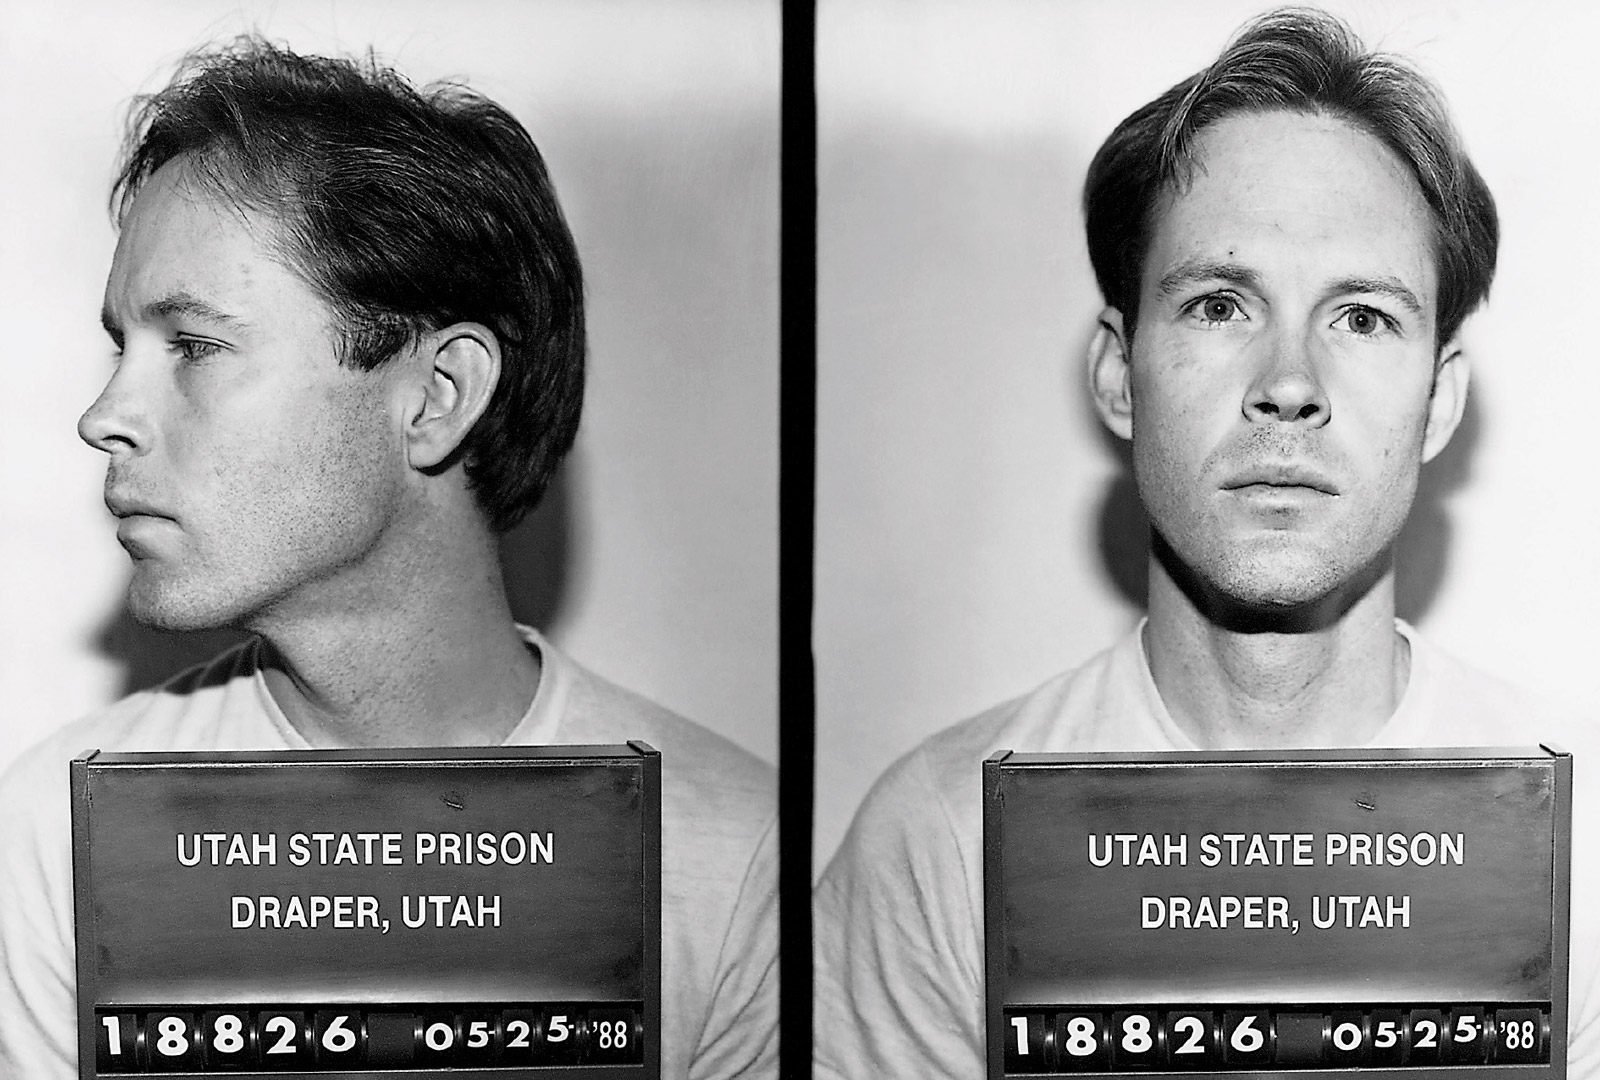 The front of a postcard featuring the 1988 mugshots of James Hogue in Utah State Prison. 